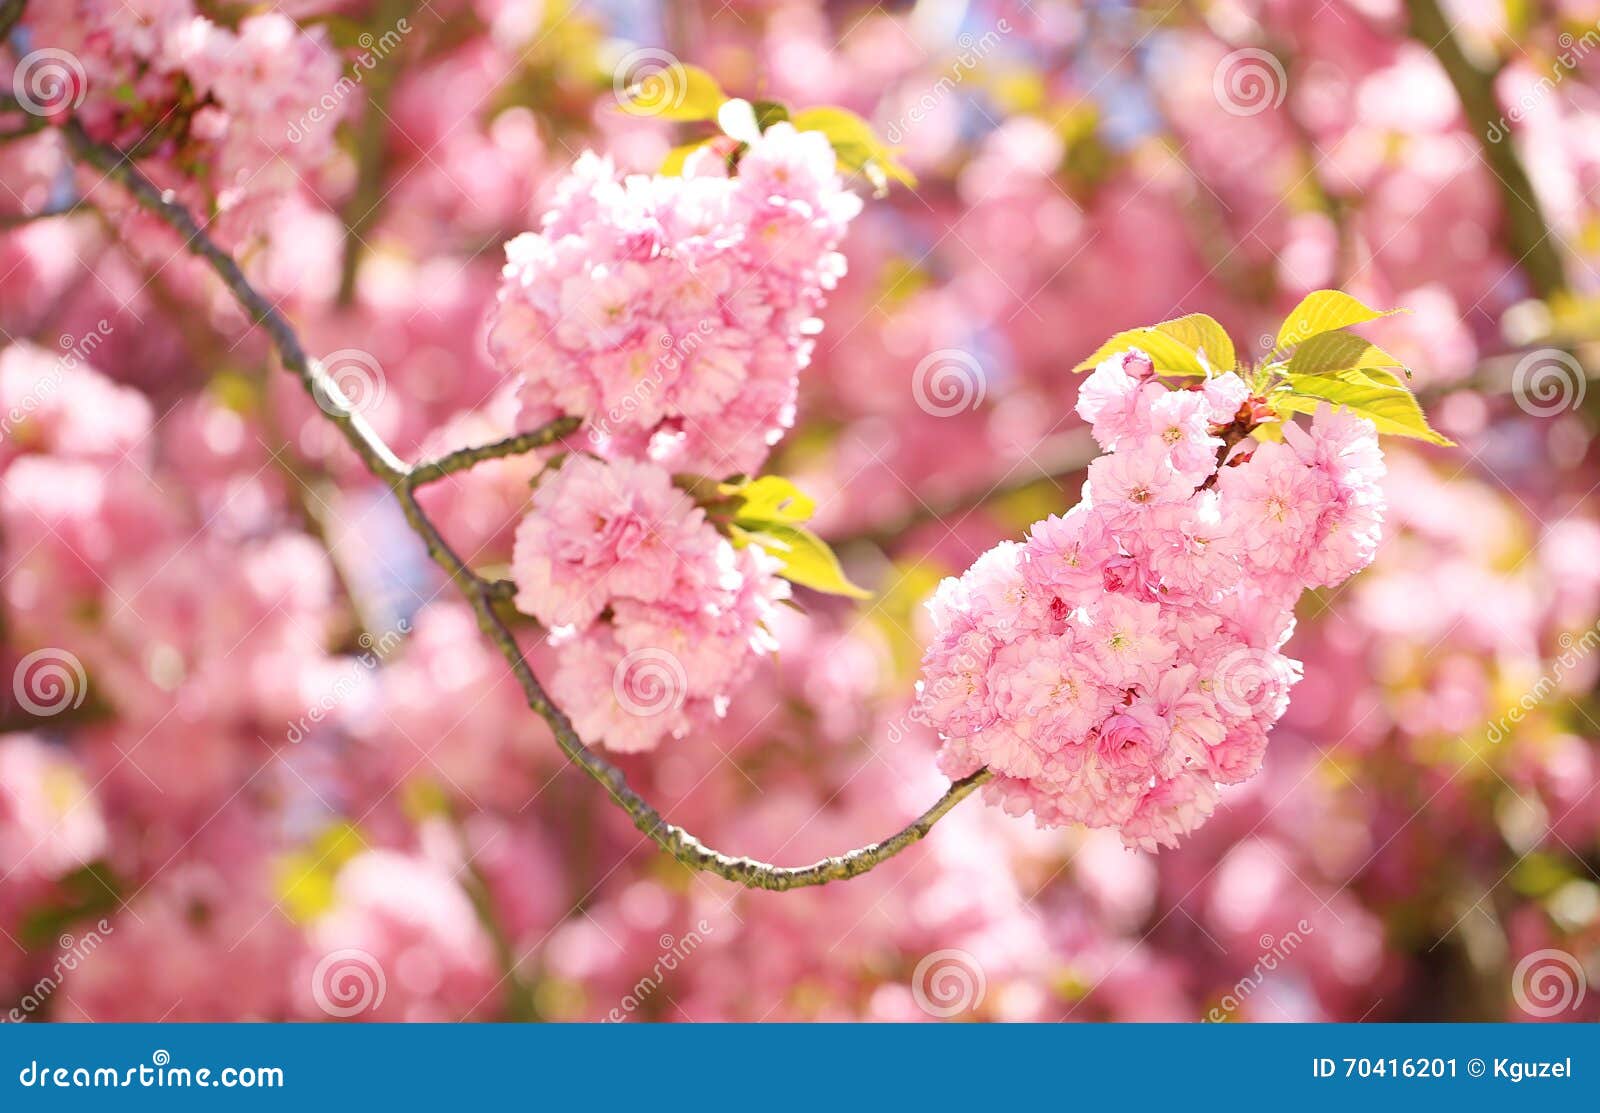 Spring Blossom. Beautiful Pink Flowers Stock Image - Image of blossom ...